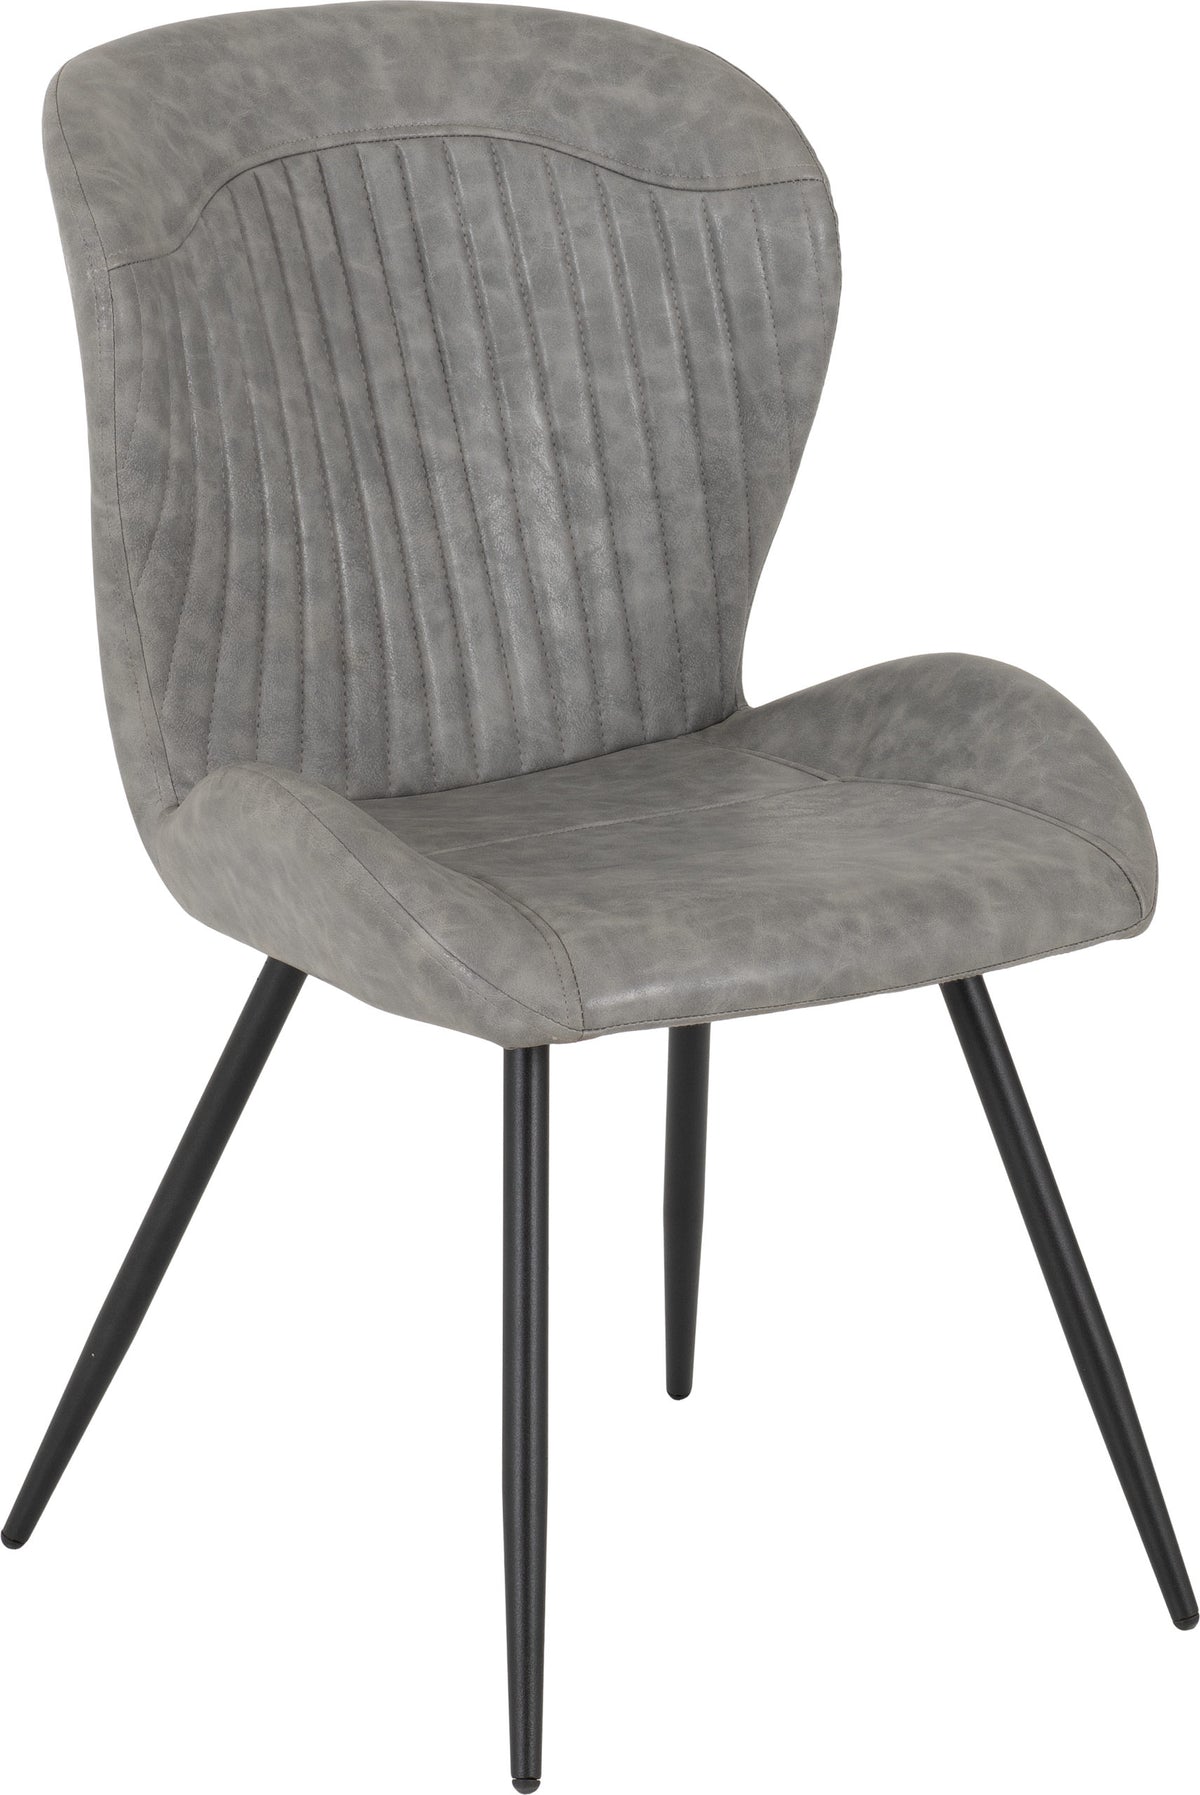 Quebec Chair (Box of 4) Grey Faux Leather